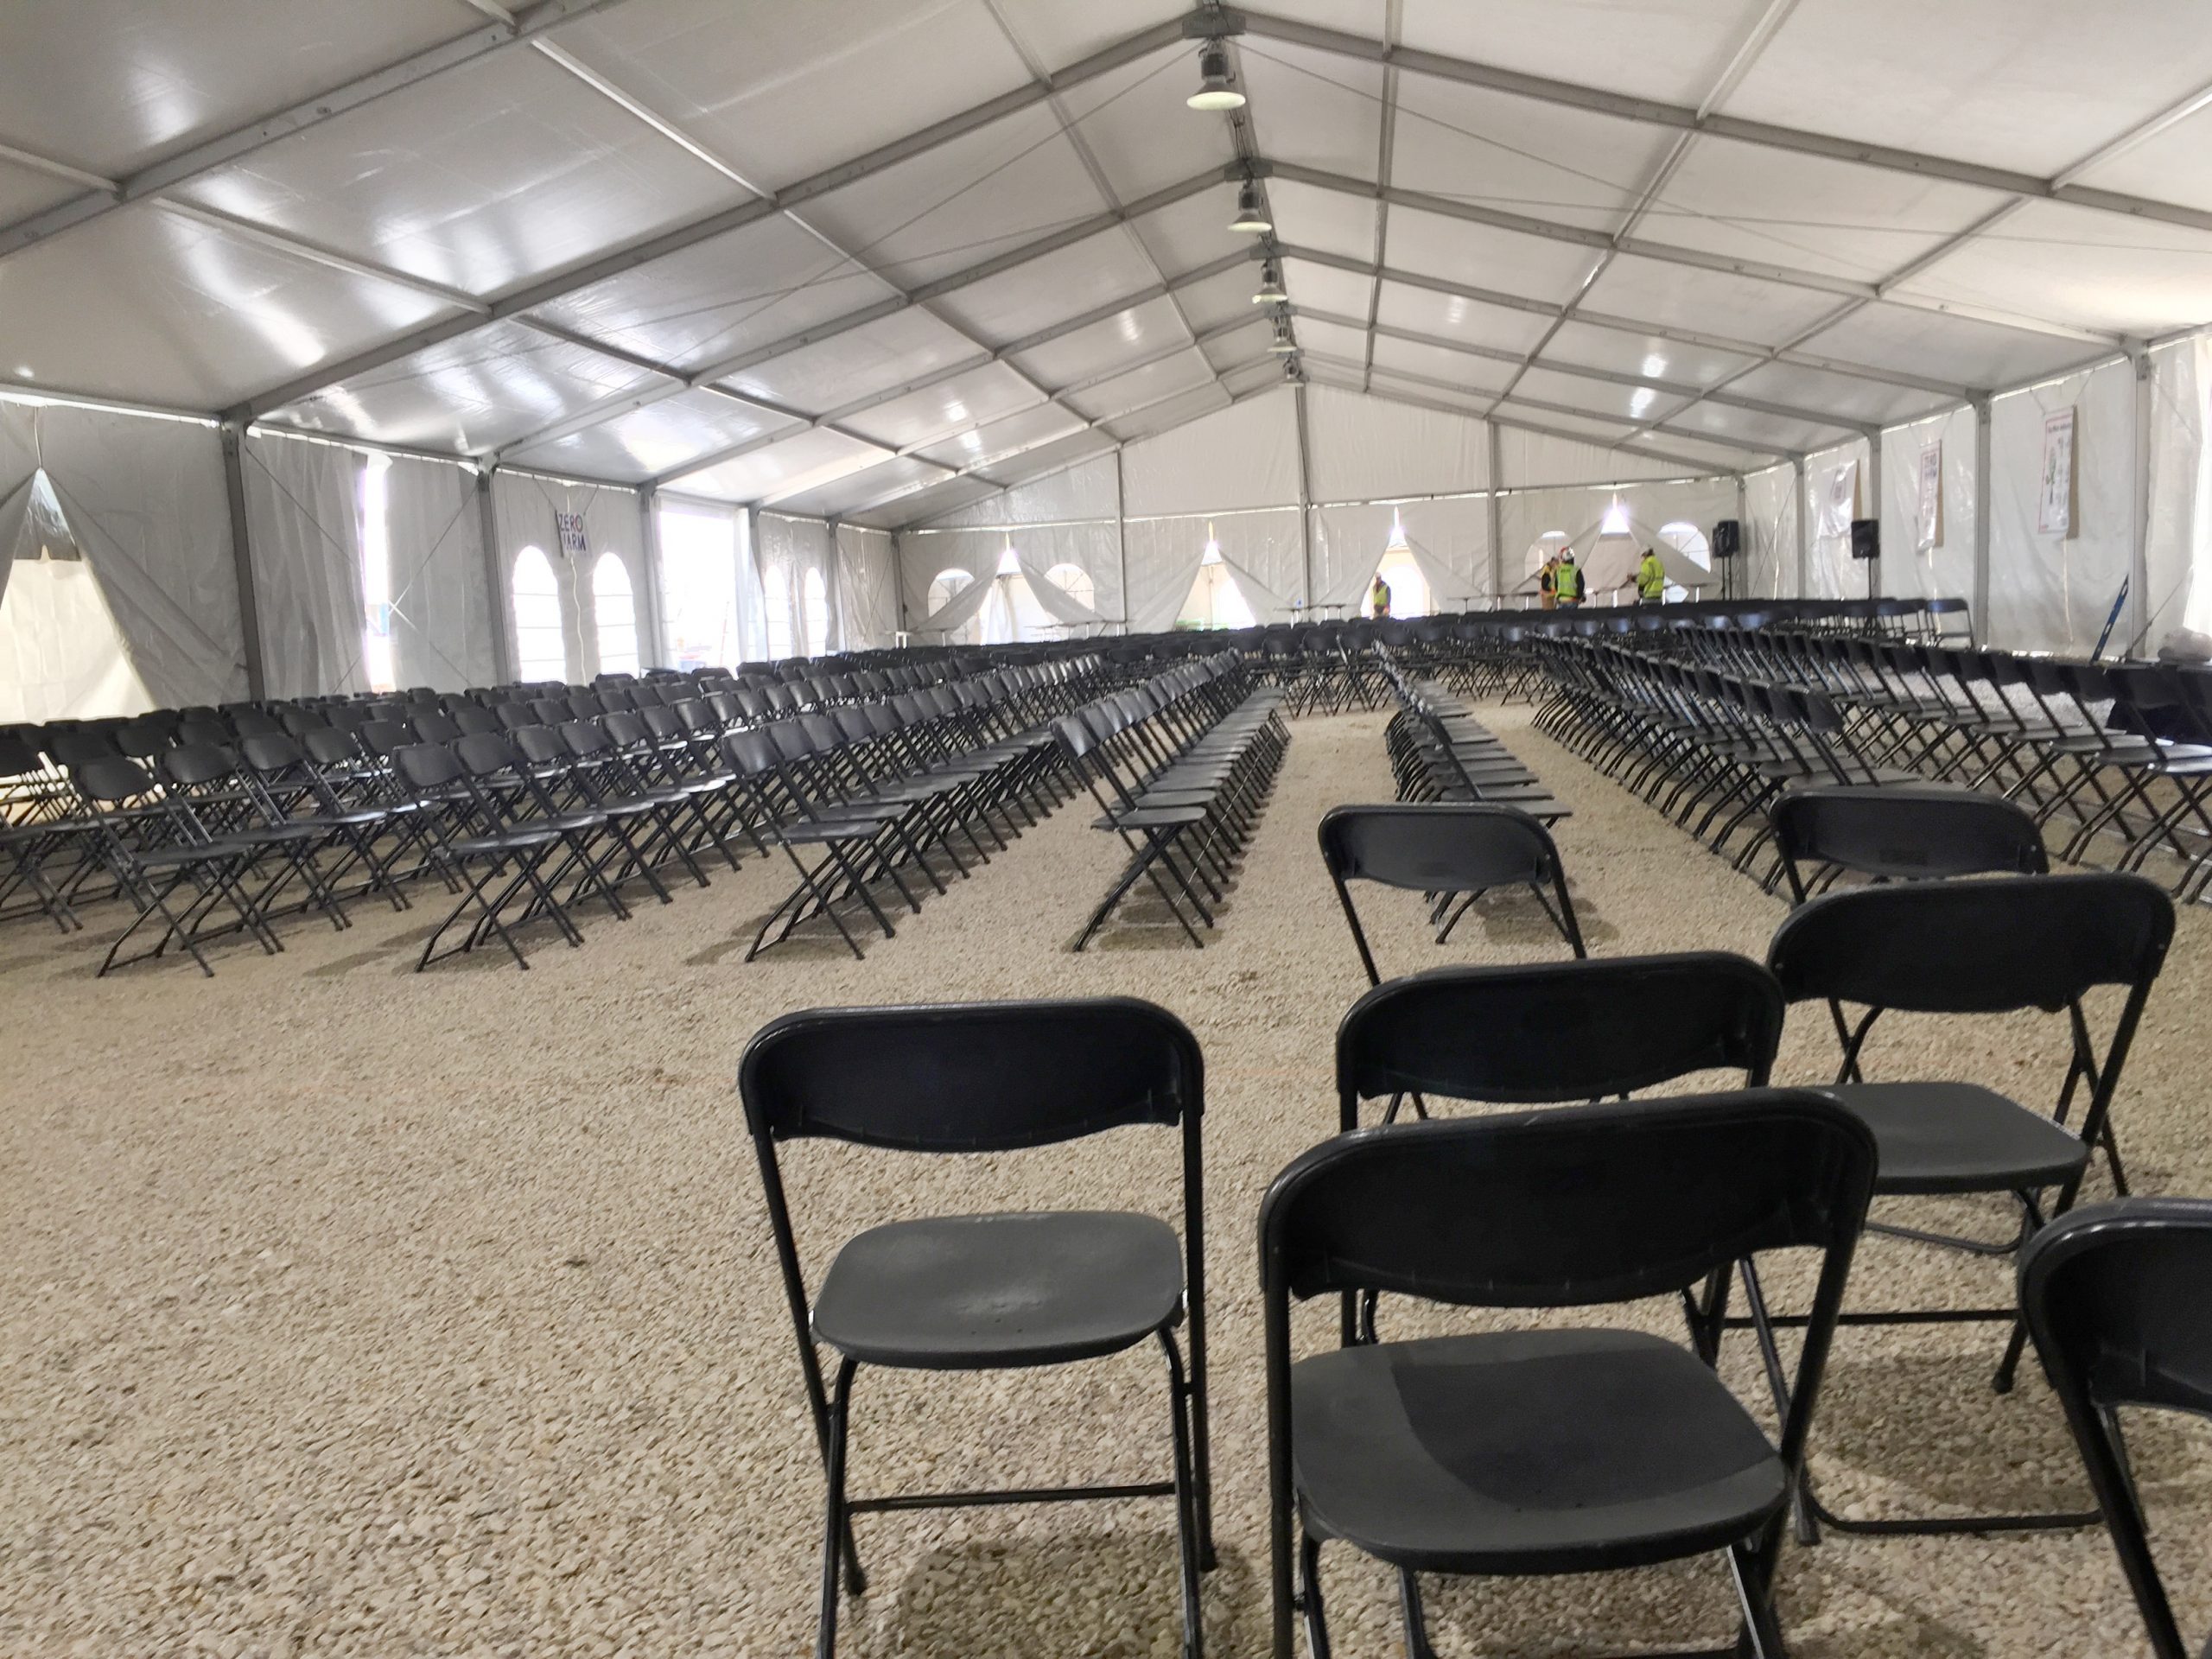 60′ x 197′ Losberger structure setup for KBR safety meeting at Alliant Energy power plant